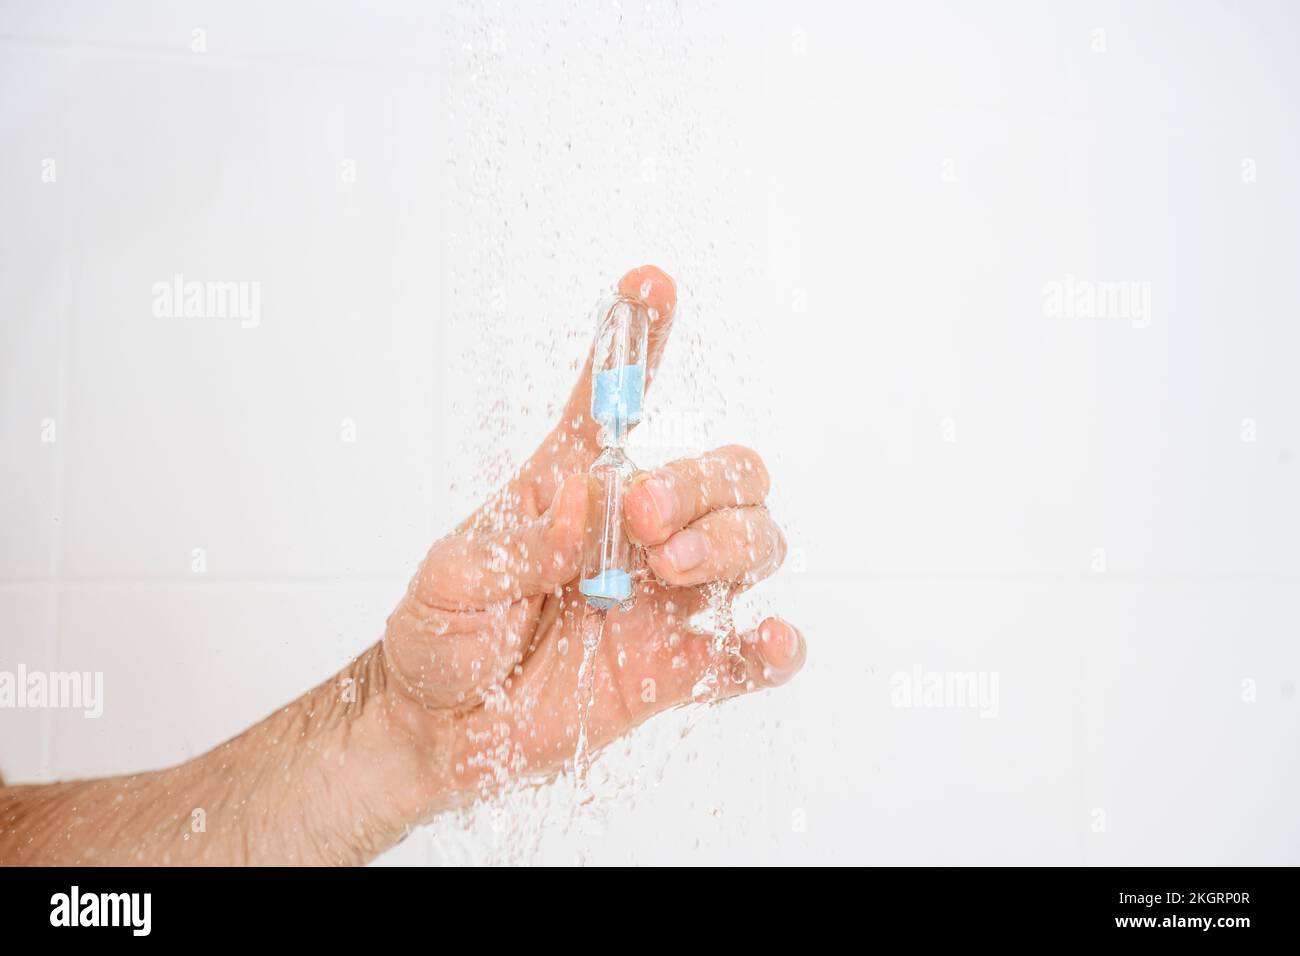 Hand of man holding hourglass in water under shower Stock Photo